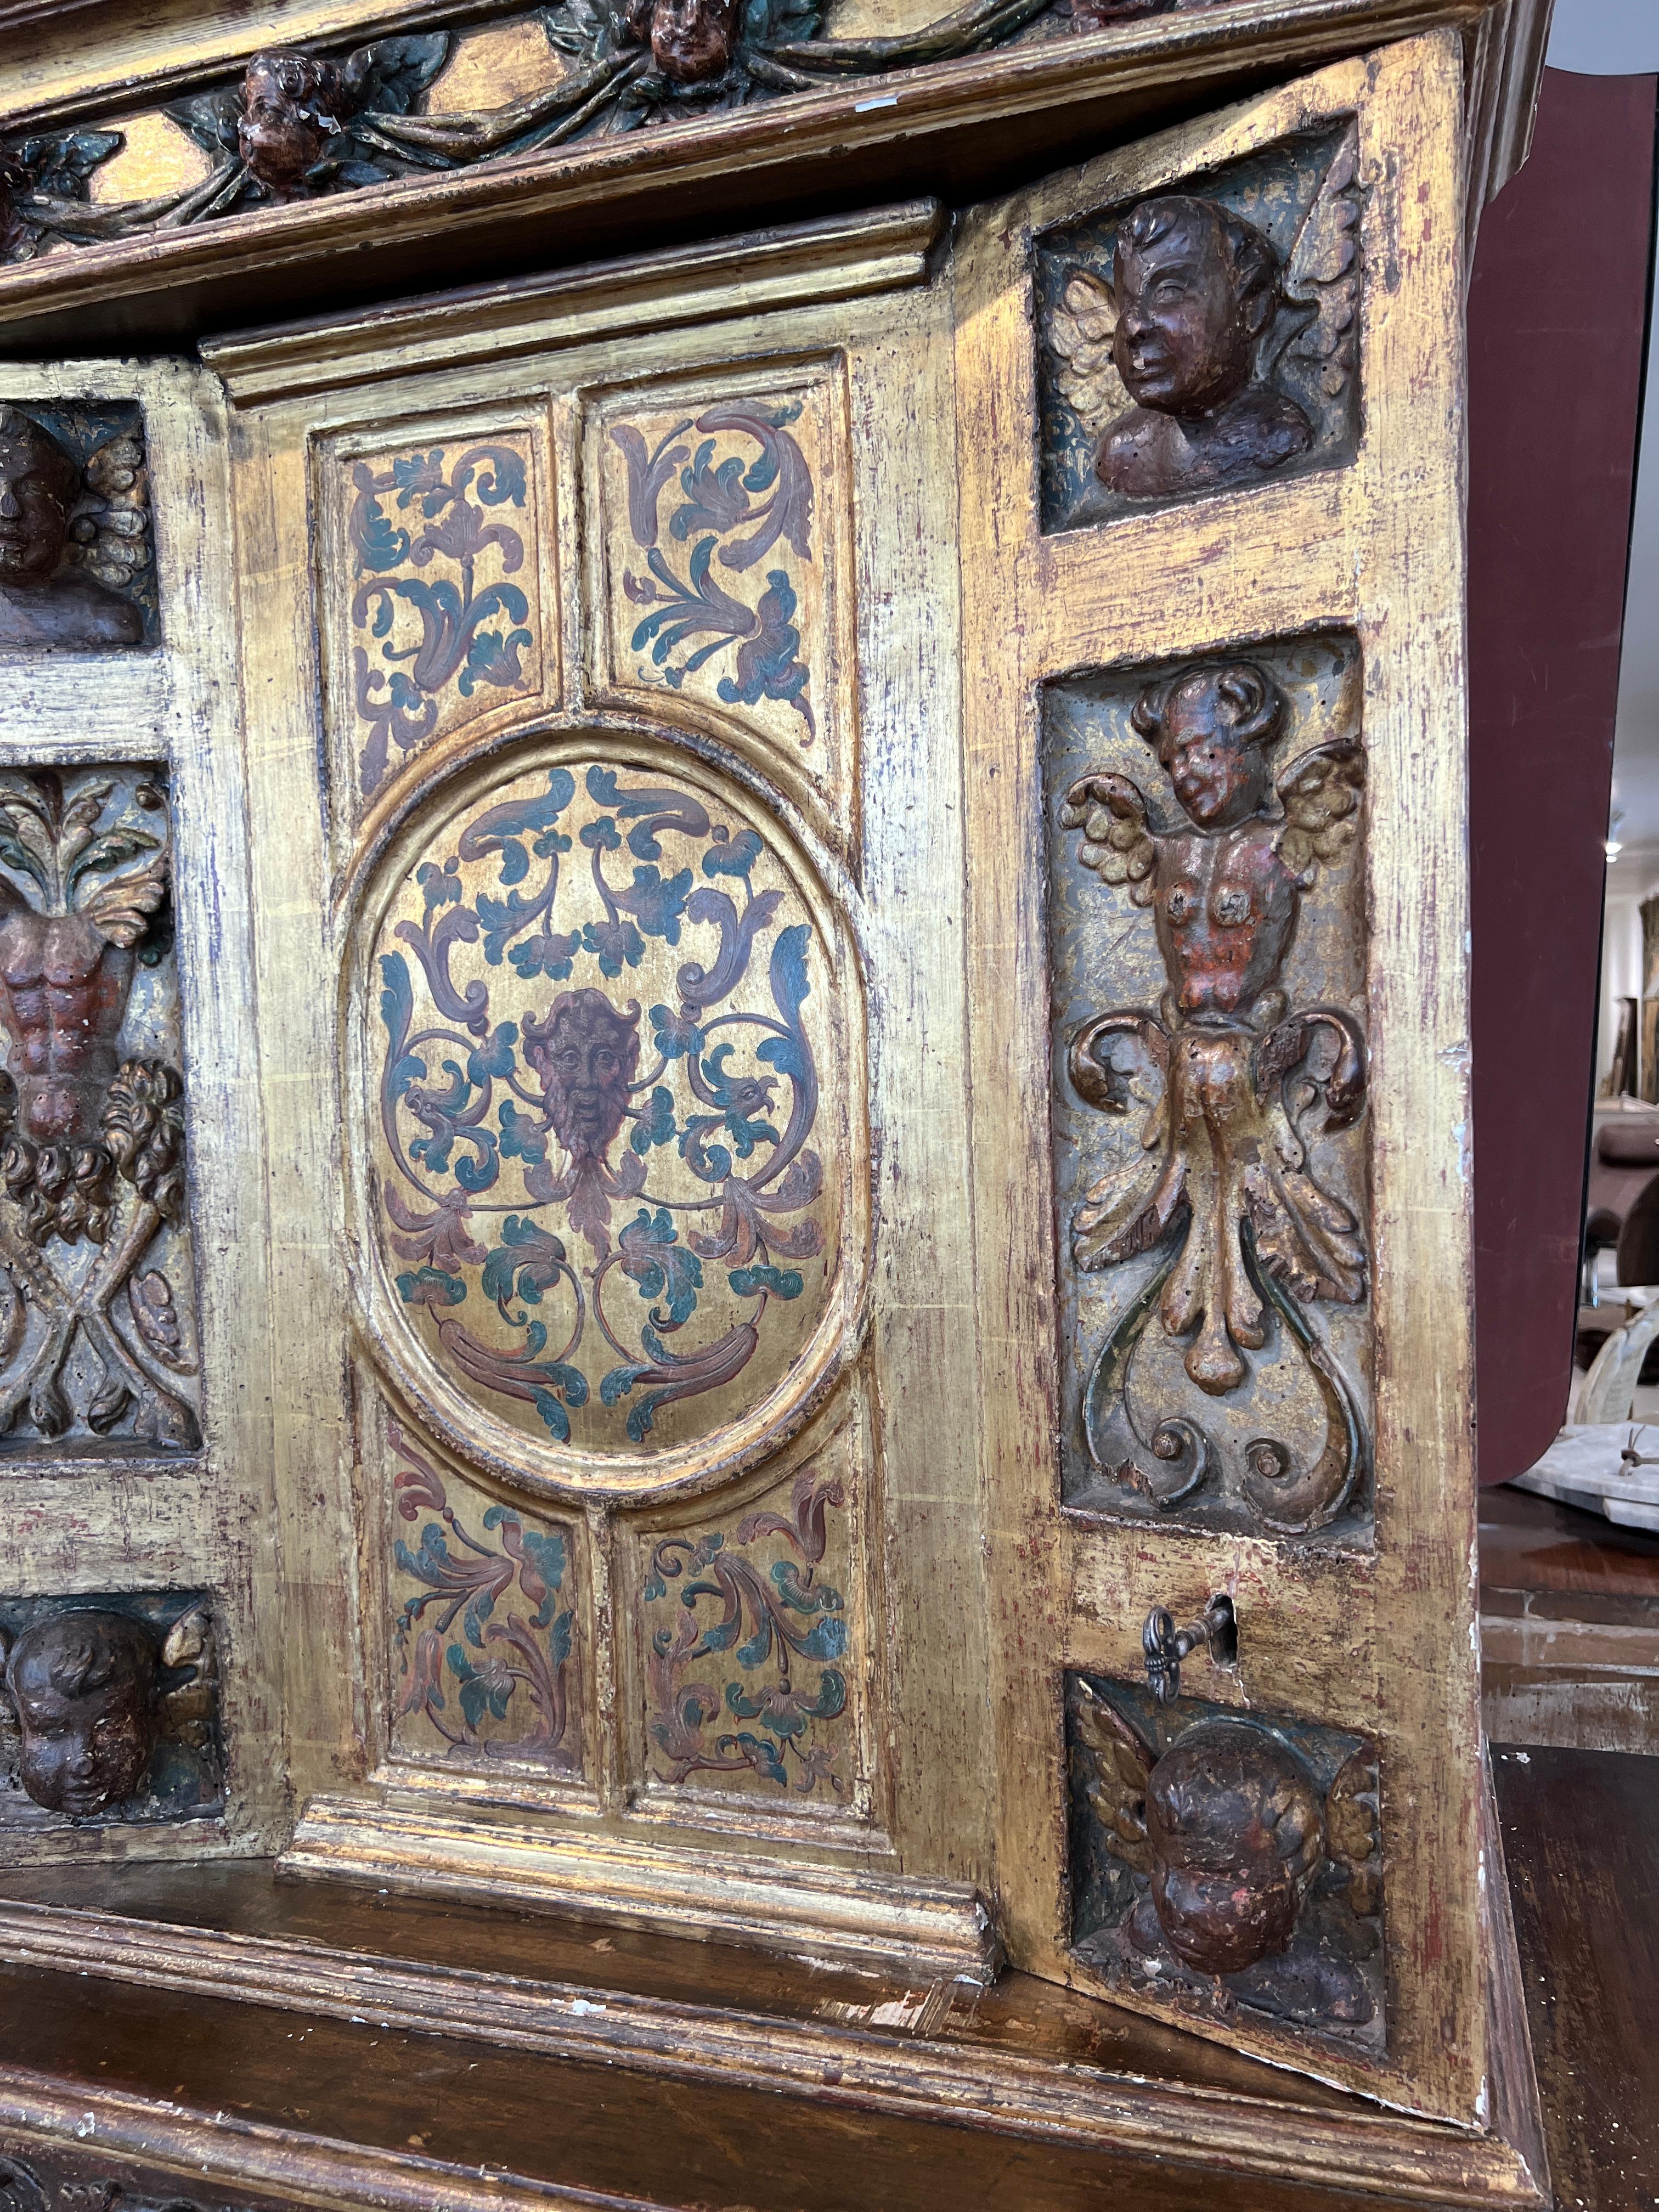 The wow factor is enormous with these matching double chests.  They have extremely ornate carving and painting galore over every surface.  